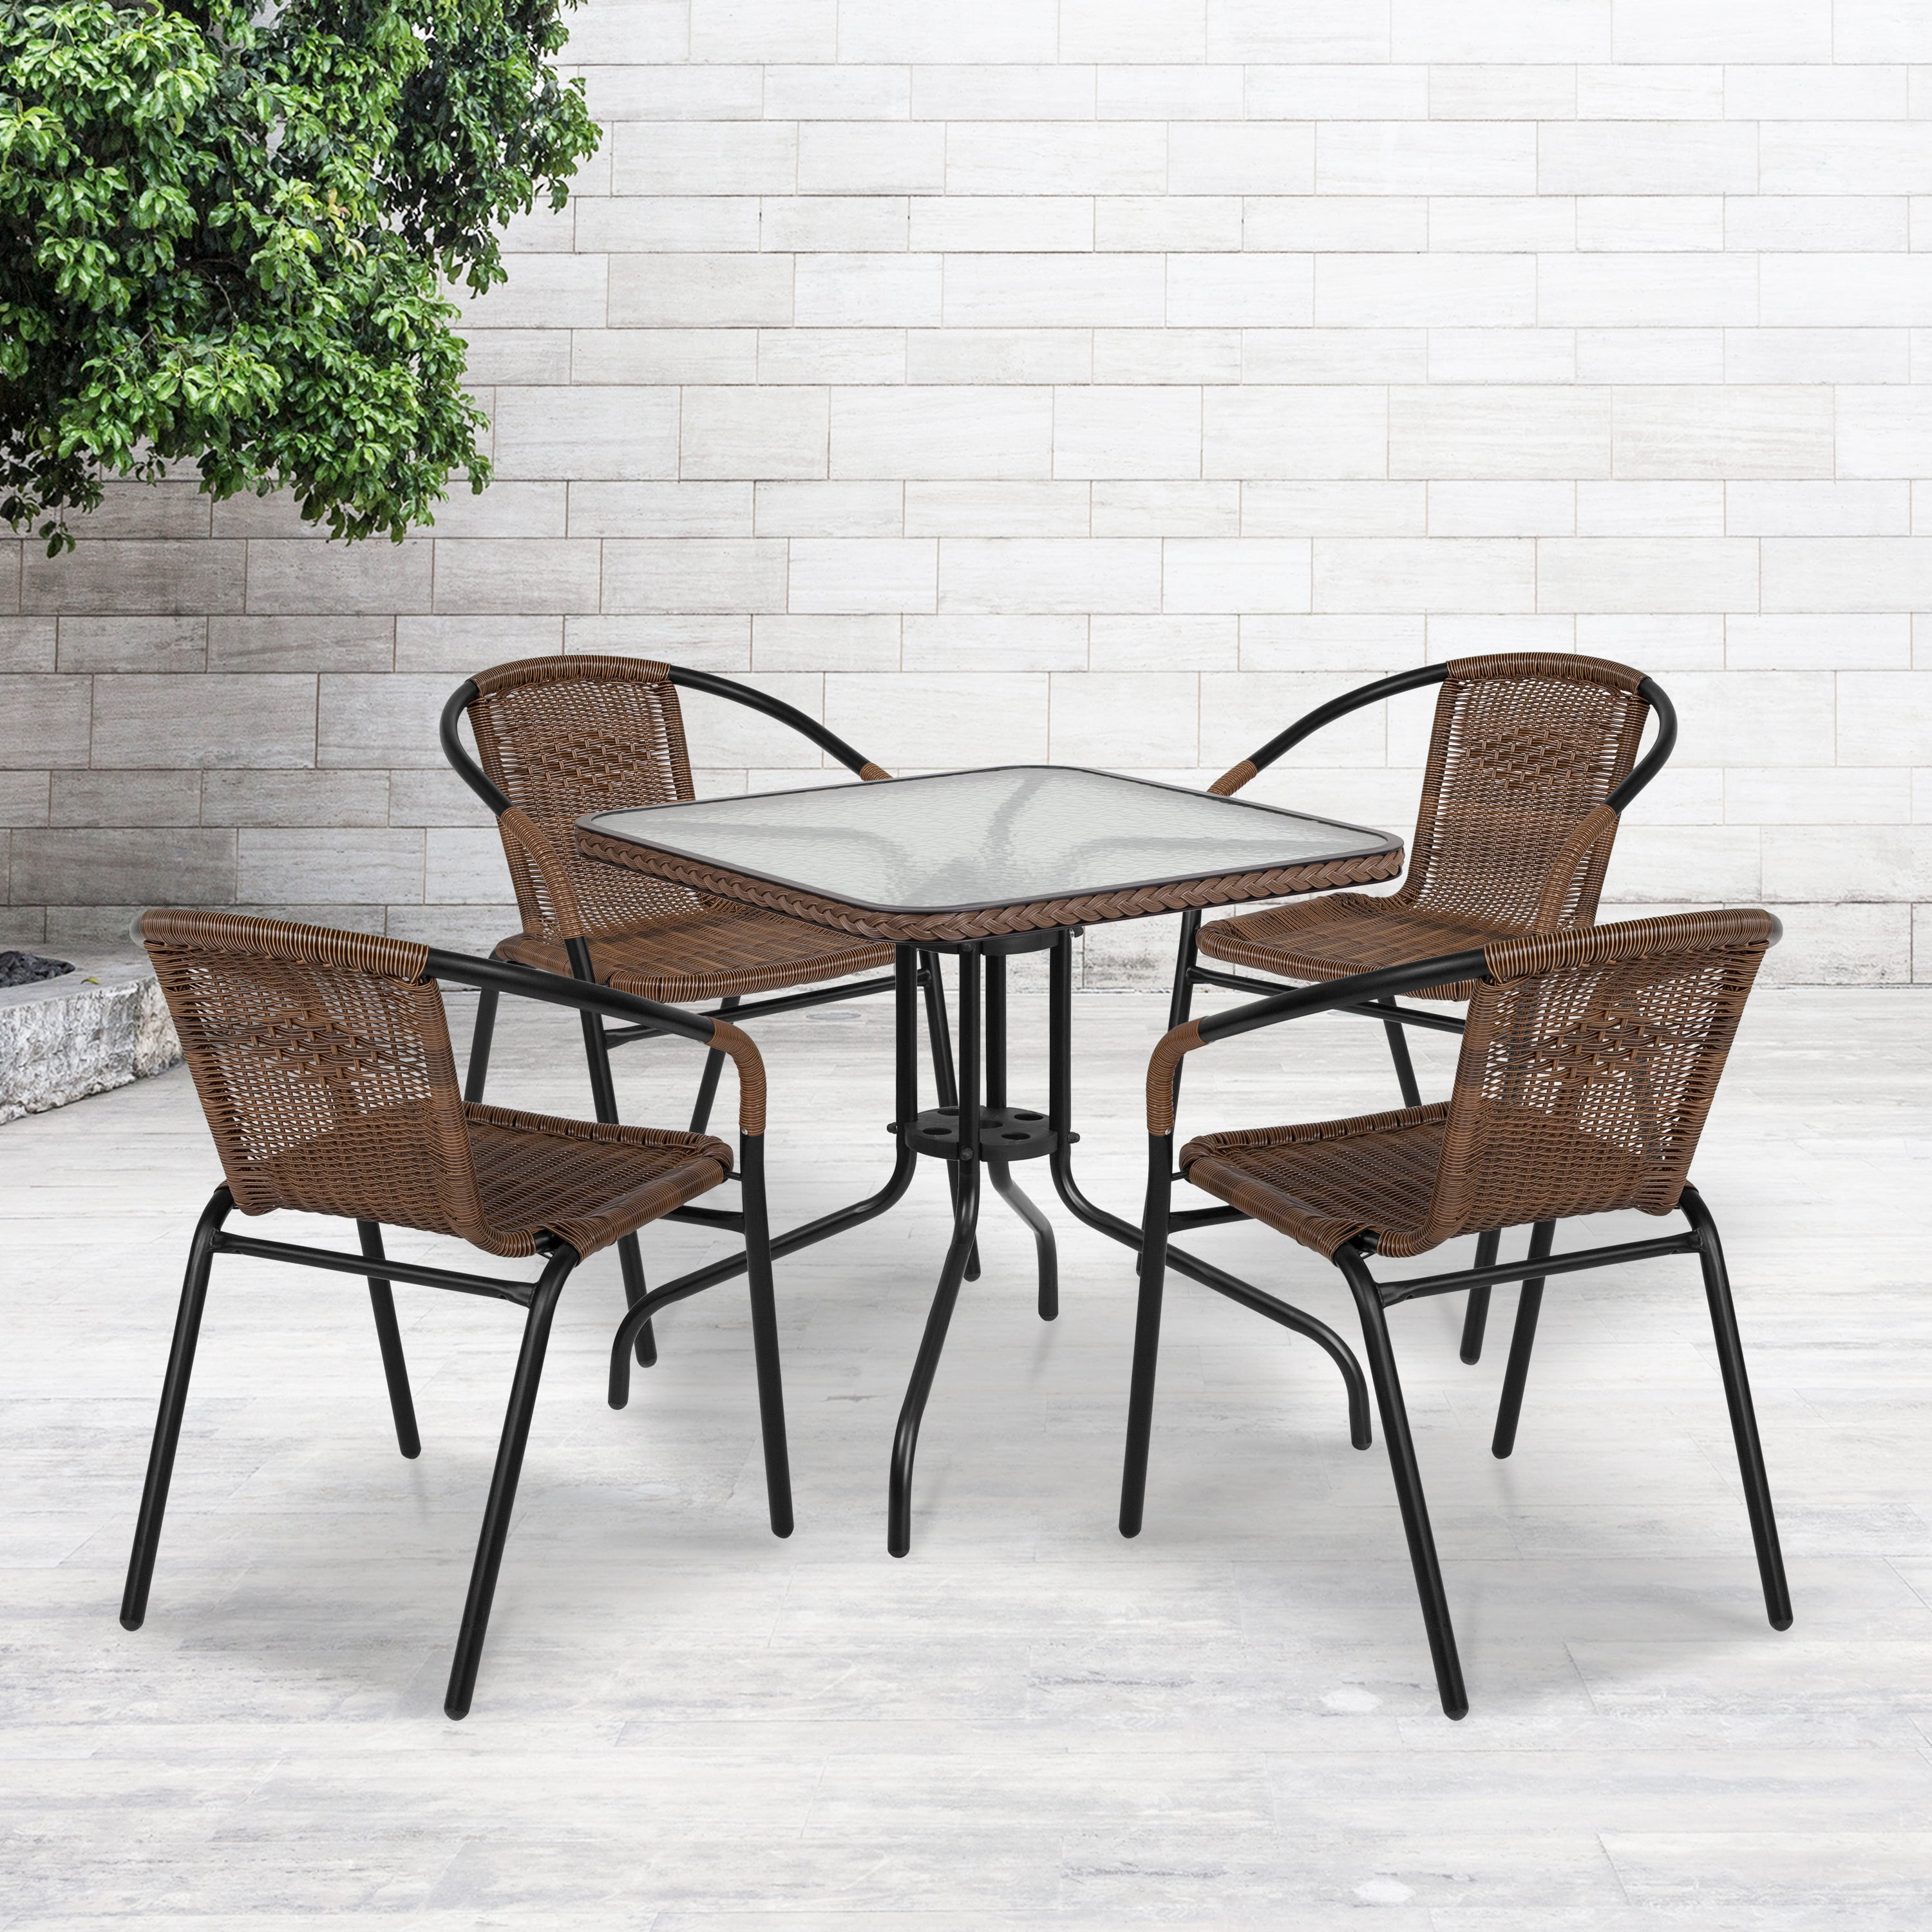 28'' Sqaure Indoor-Outdoor Restaurant Table Set with 4 Gray Rattan Chairs